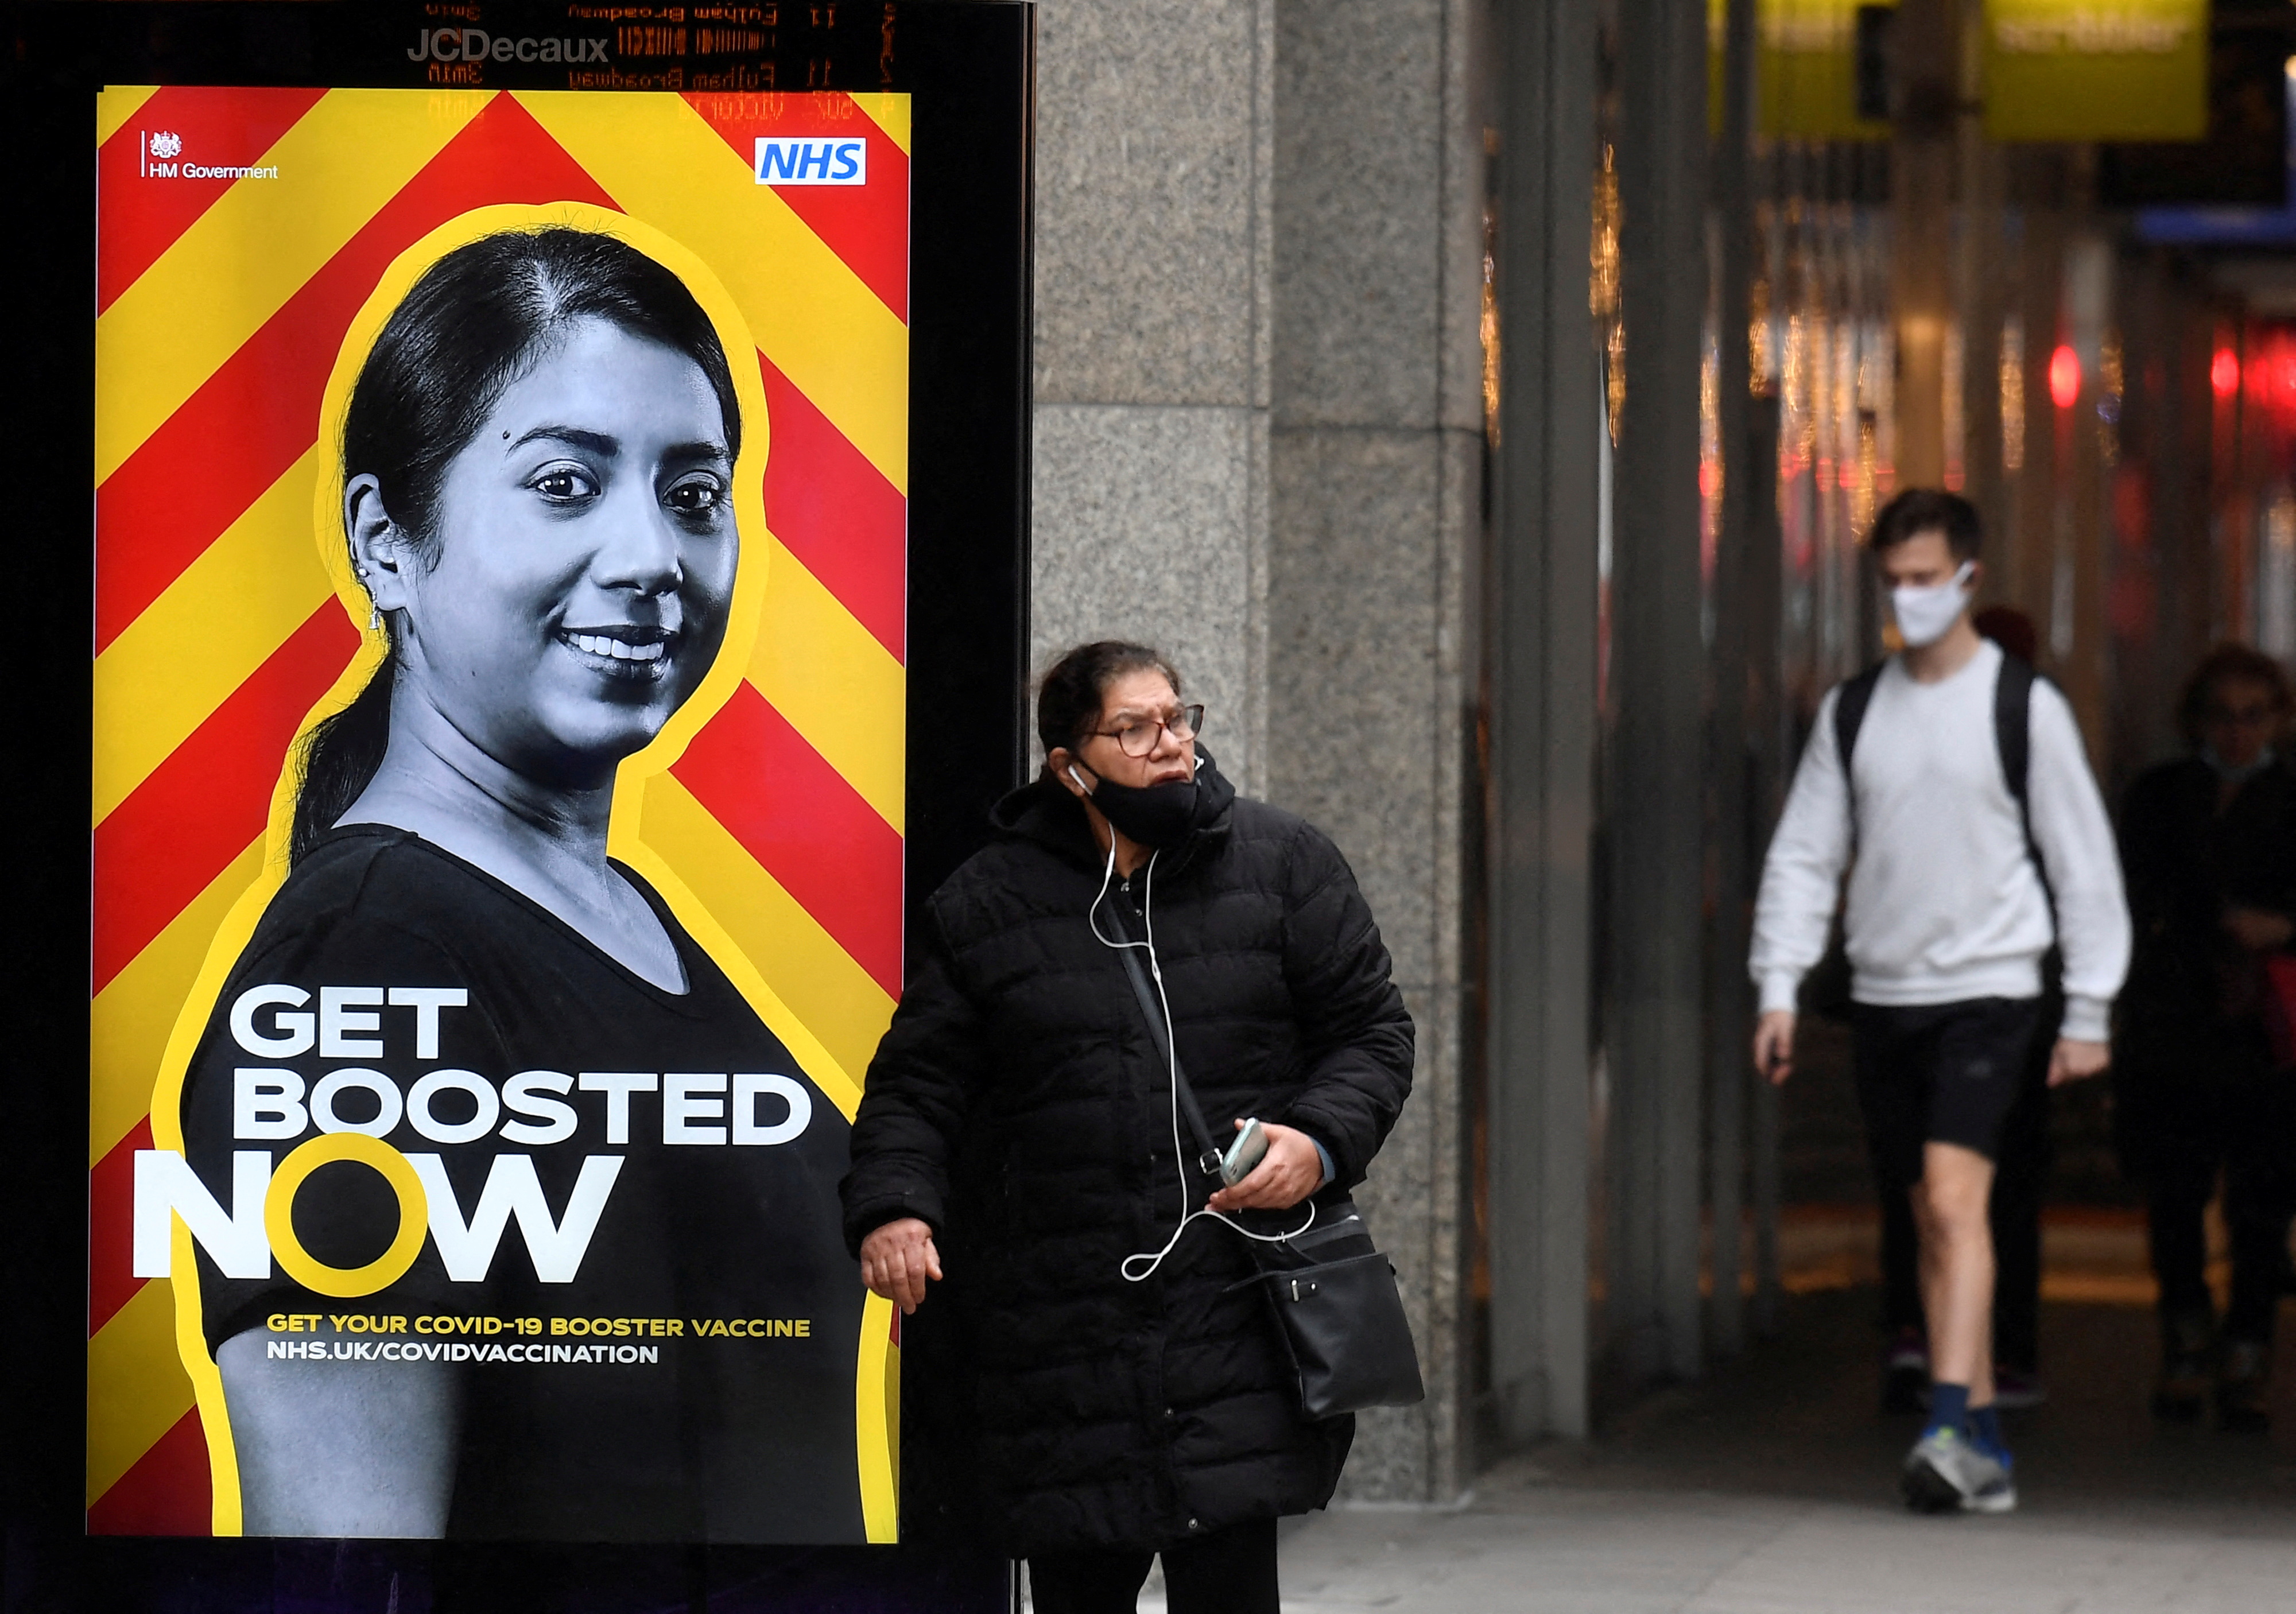 A government health campaign advertisement is seen at a bus stop, amid the spread of the coronavirus disease (COVID-19) pandemic, in London